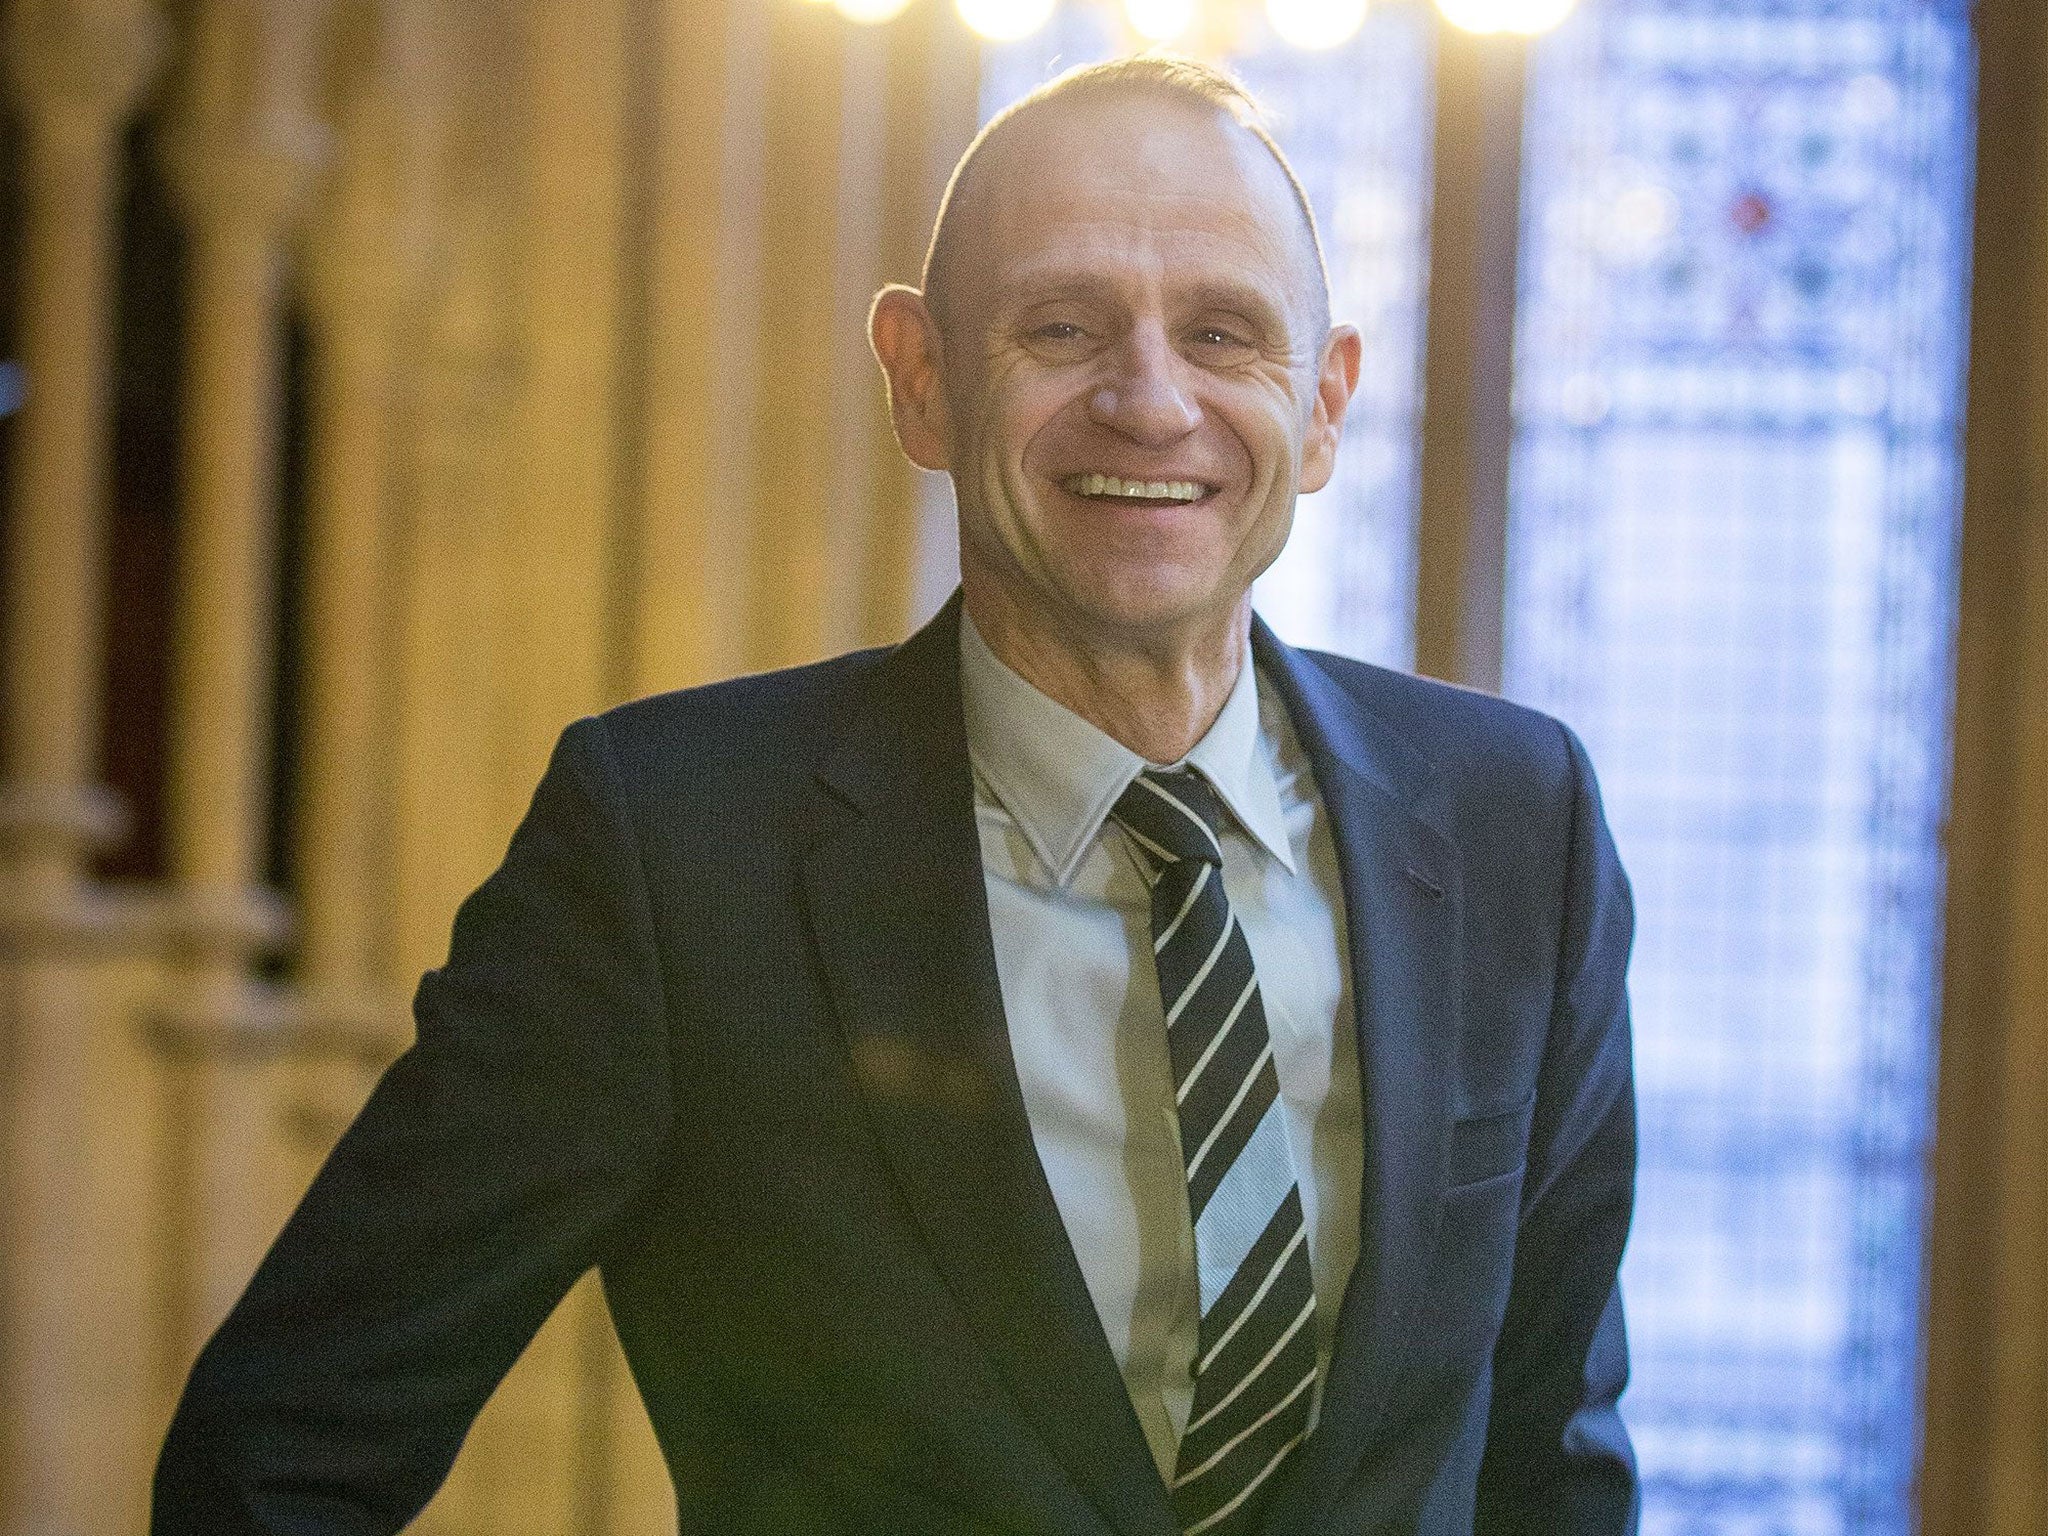 ‘Newsnight’ presenter Evan Davis: the successor to Jeremy Paxman took a while to settle in